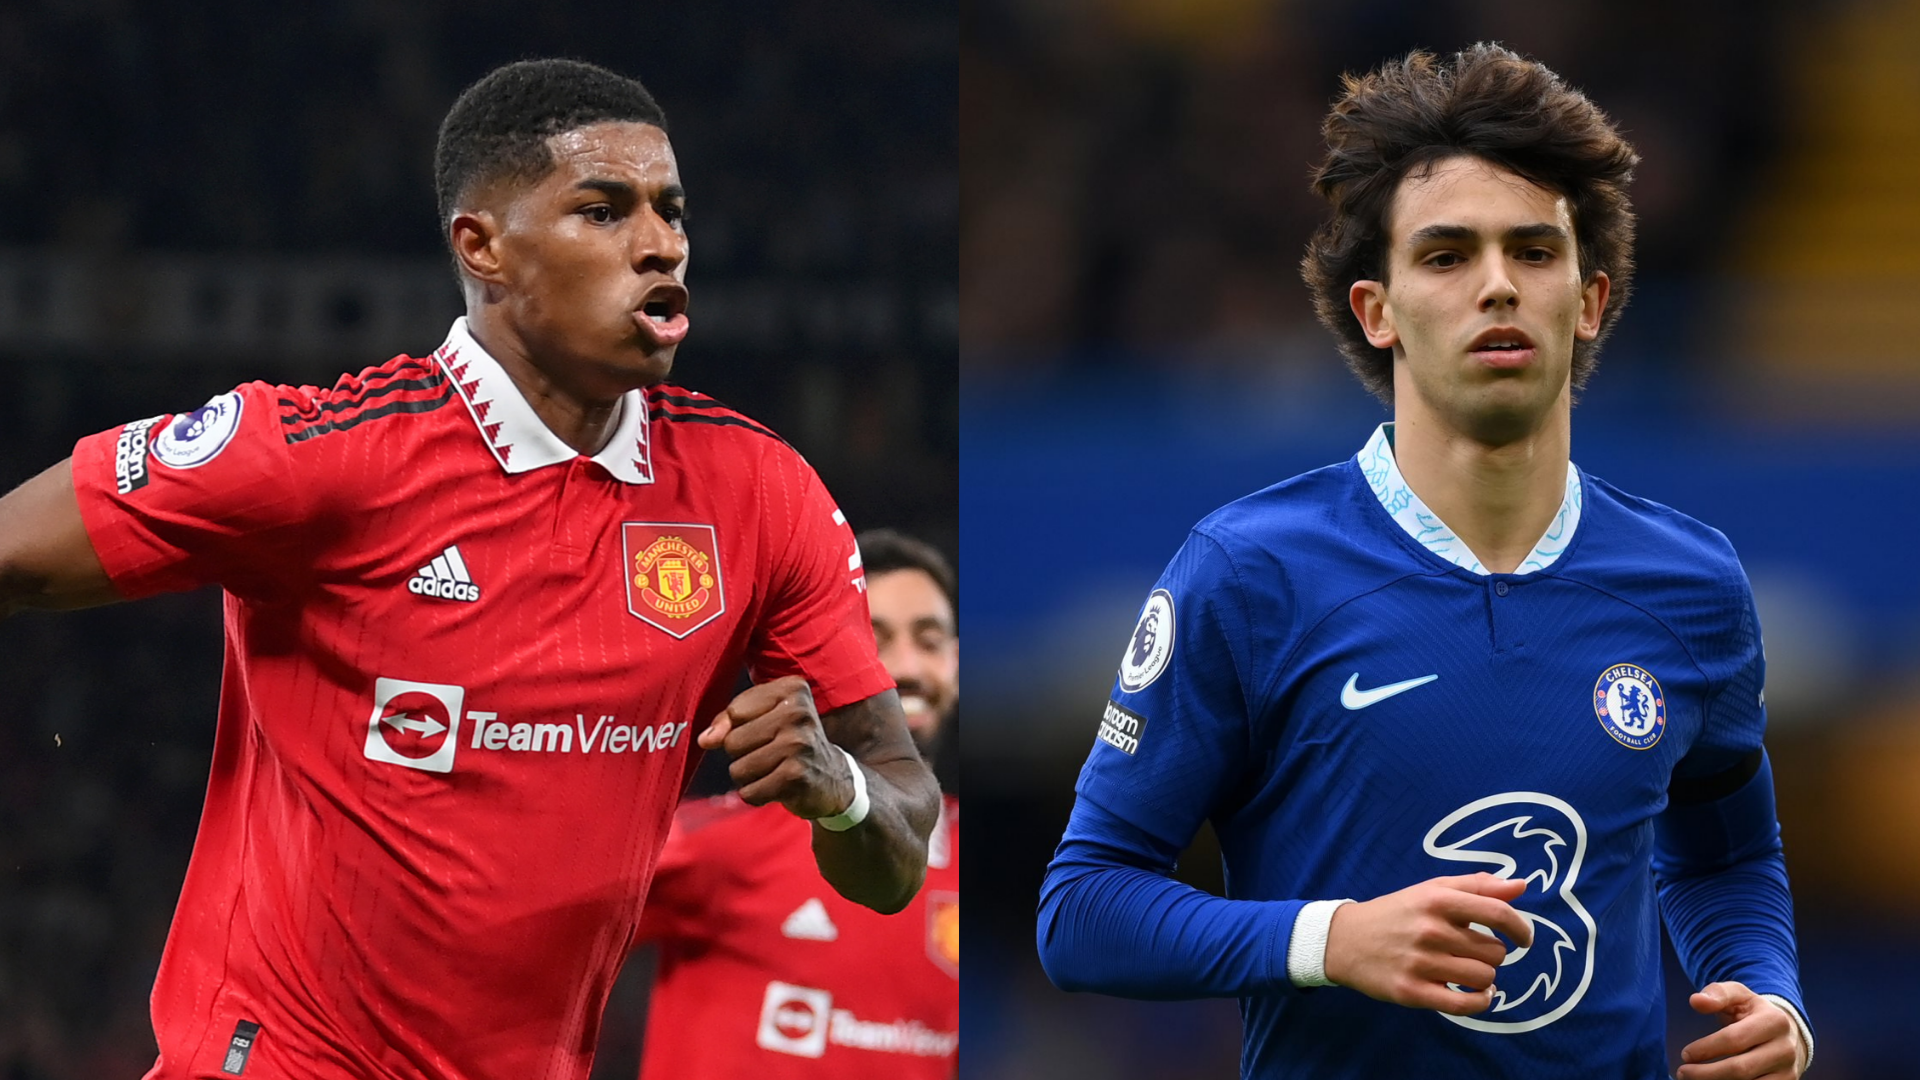 Manchester United vs Chelsea Live stream, TV channel, kick-off time and where to watch Goal UK